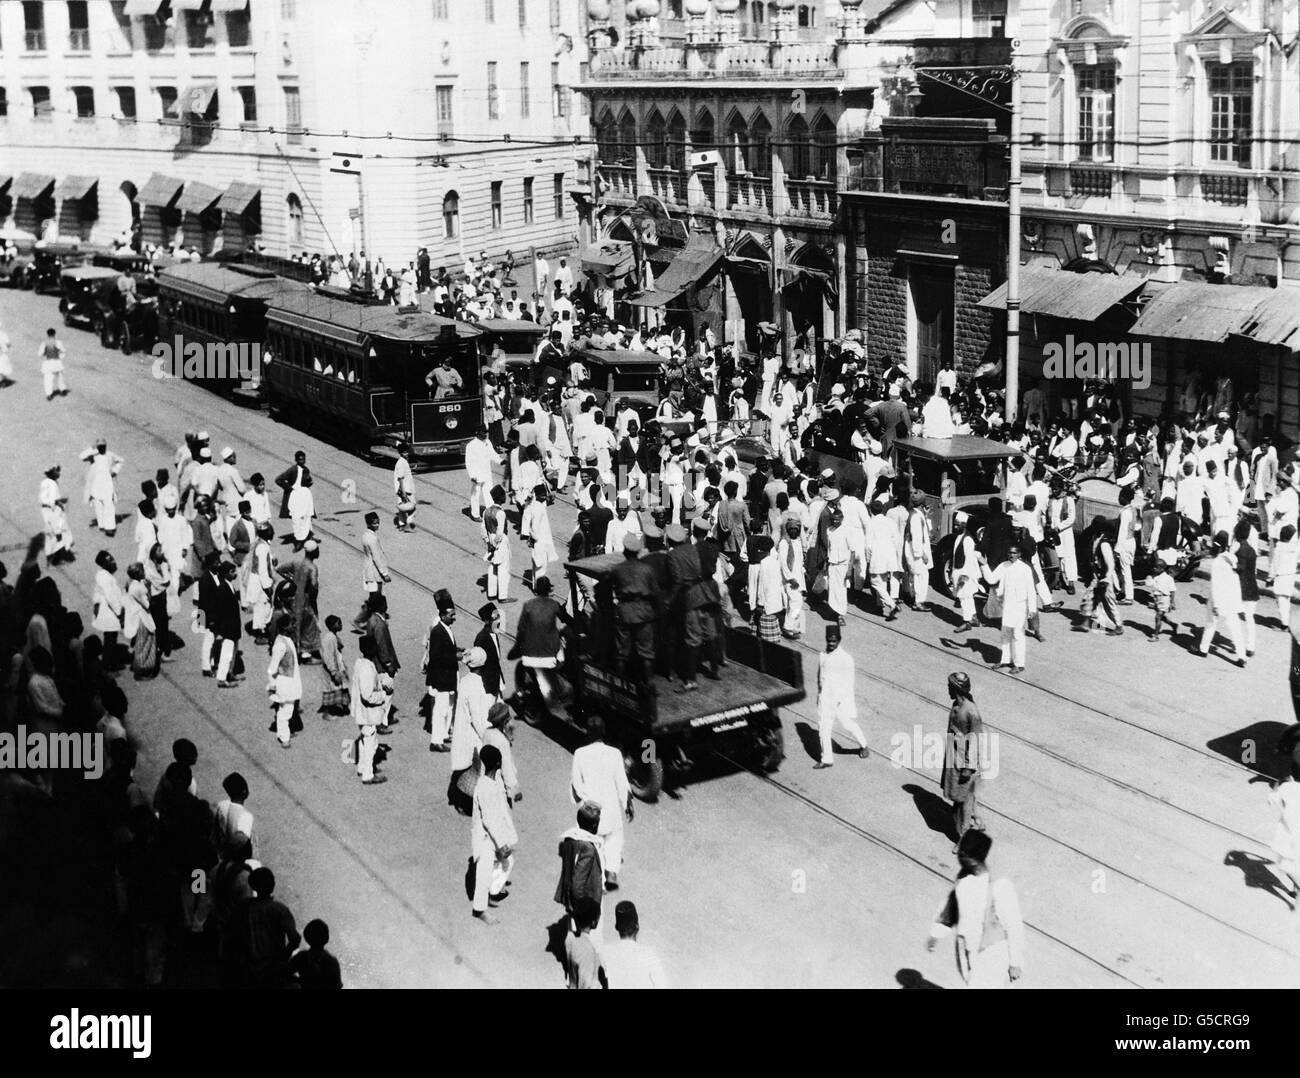 BOMBAY 1929: British and Indian Police officers move in to quell a street disturbance during rioting in Bombay in 1929. Stock Photo